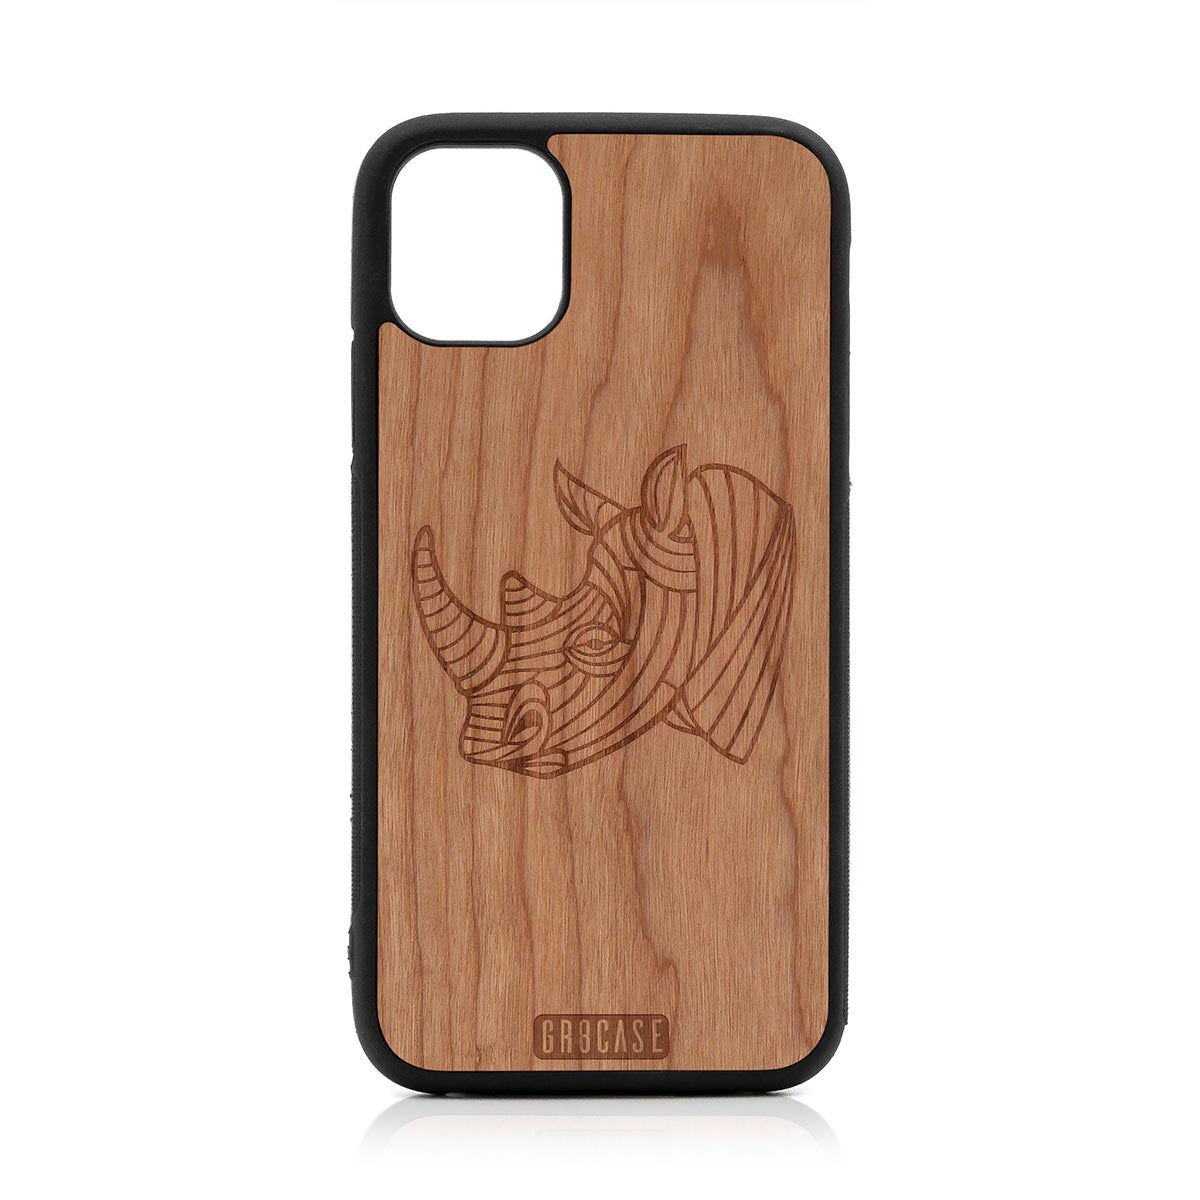 Rhino Design Wood Case For iPhone 11 by GR8CASE